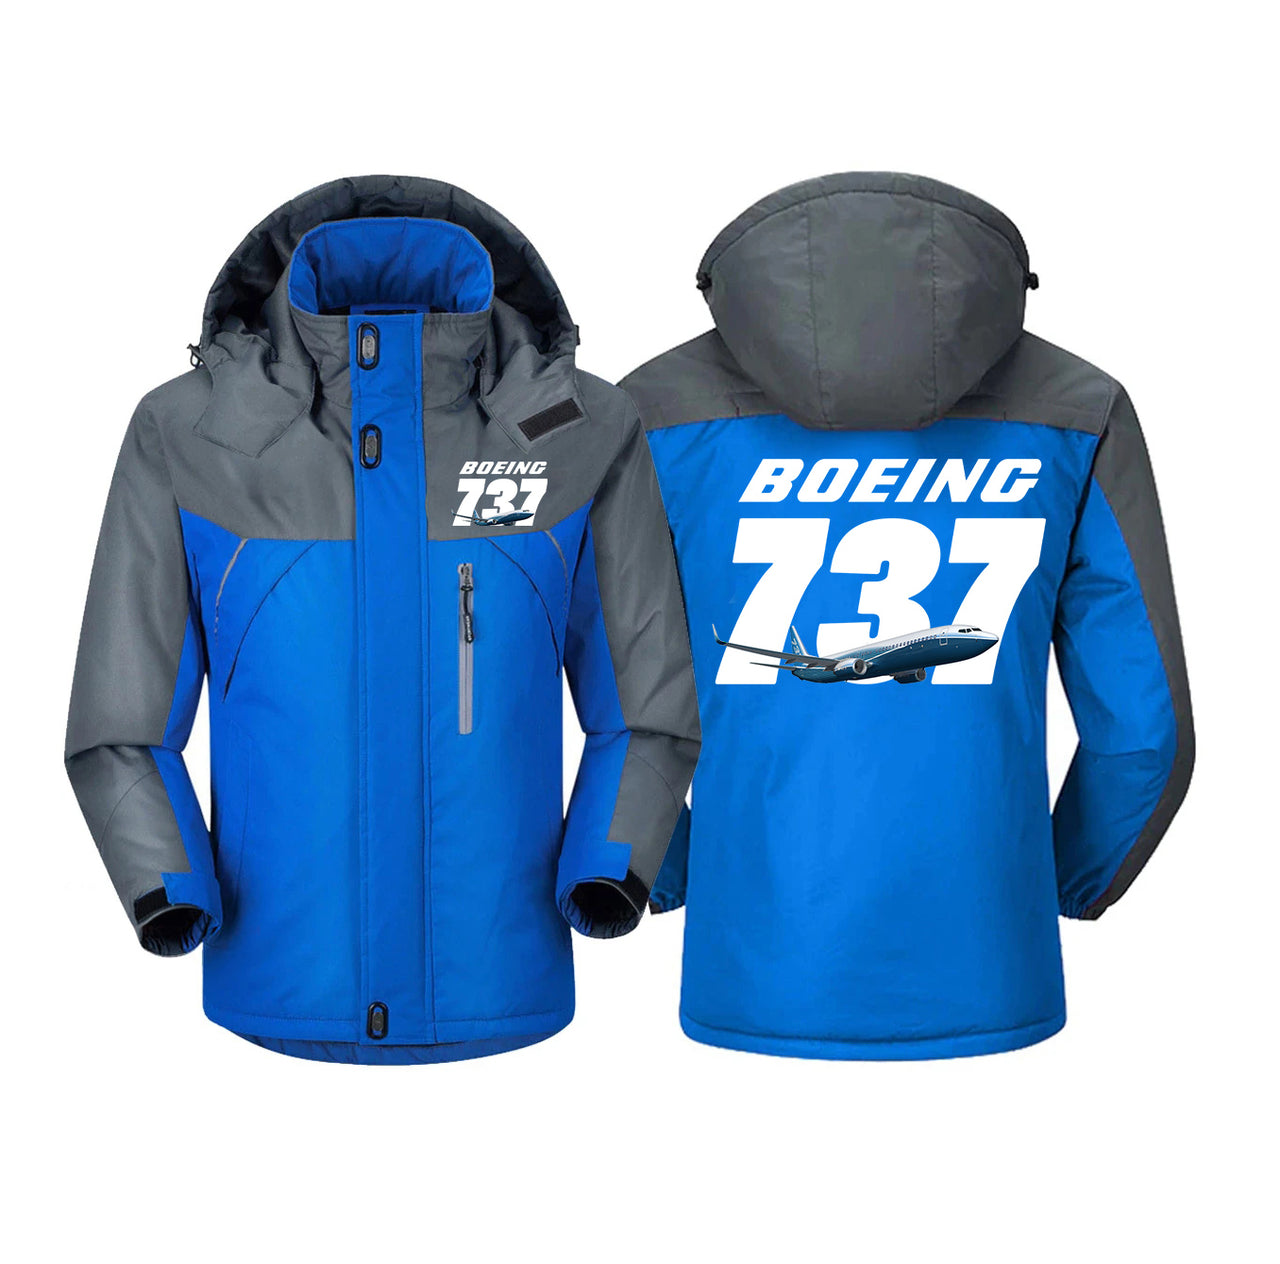 Super Boeing 737+Text Designed Thick Winter Jackets